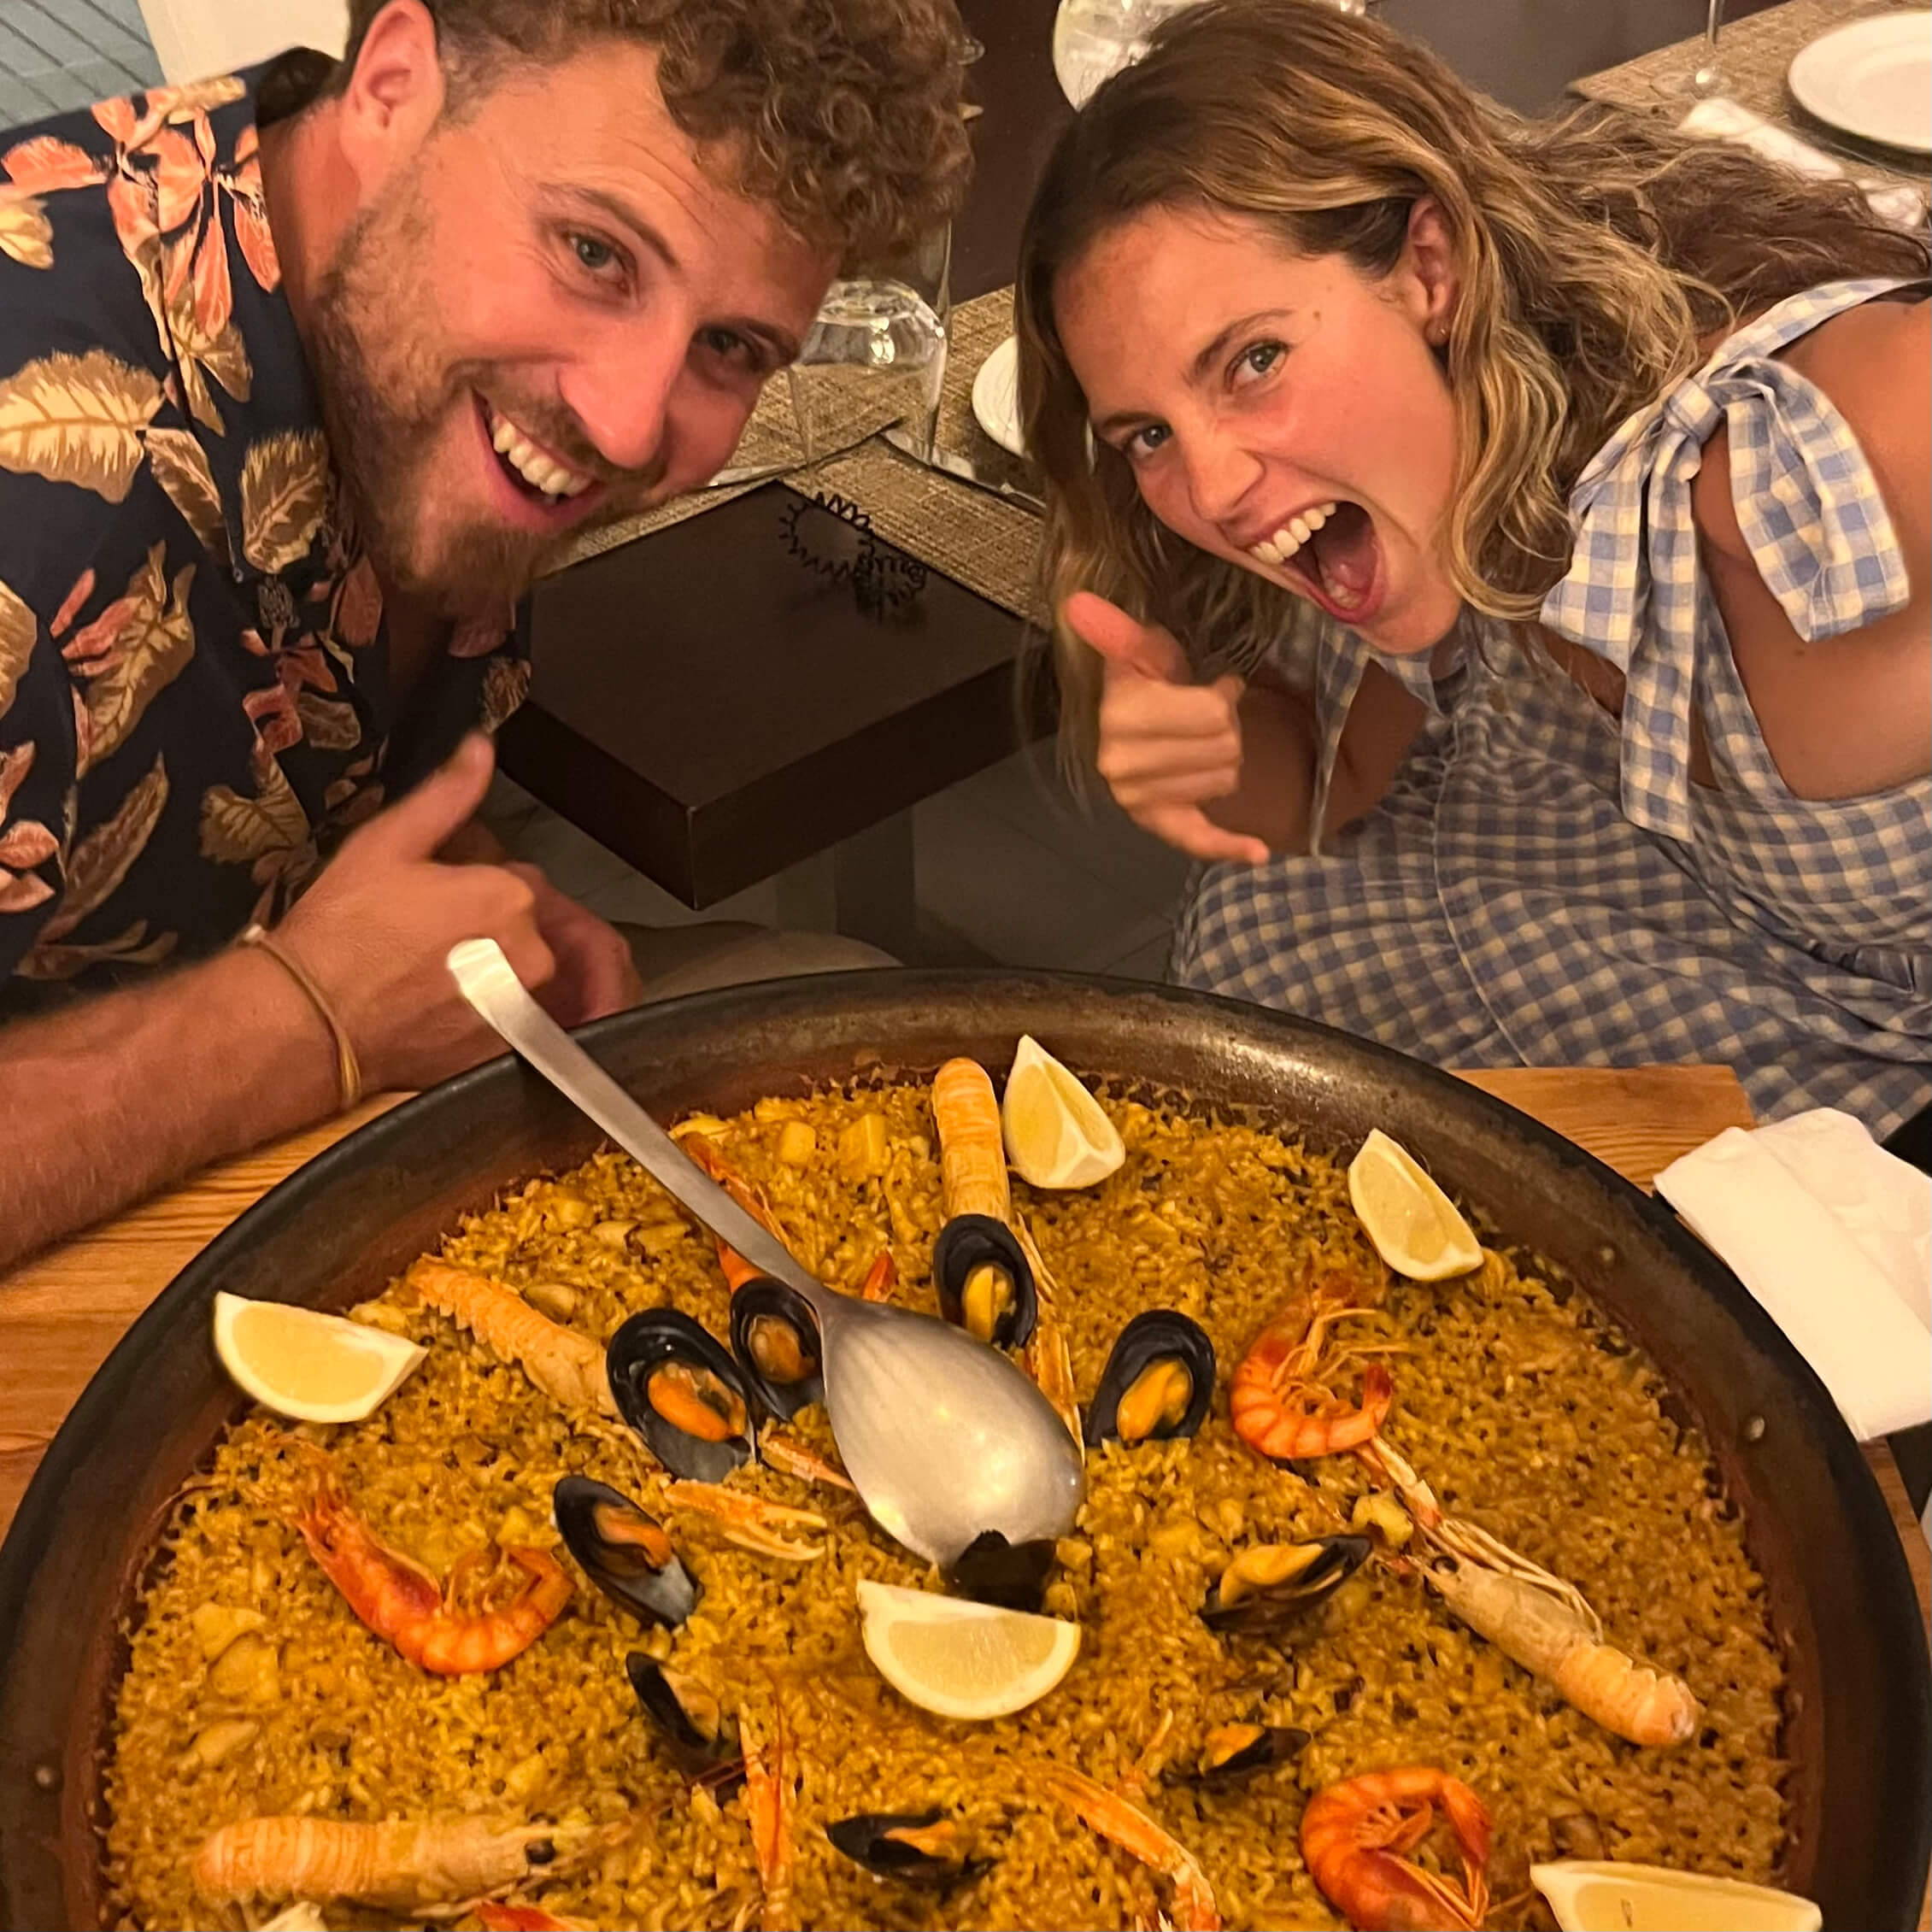 Dani and Harvey about to have Seafood Paella in Spain